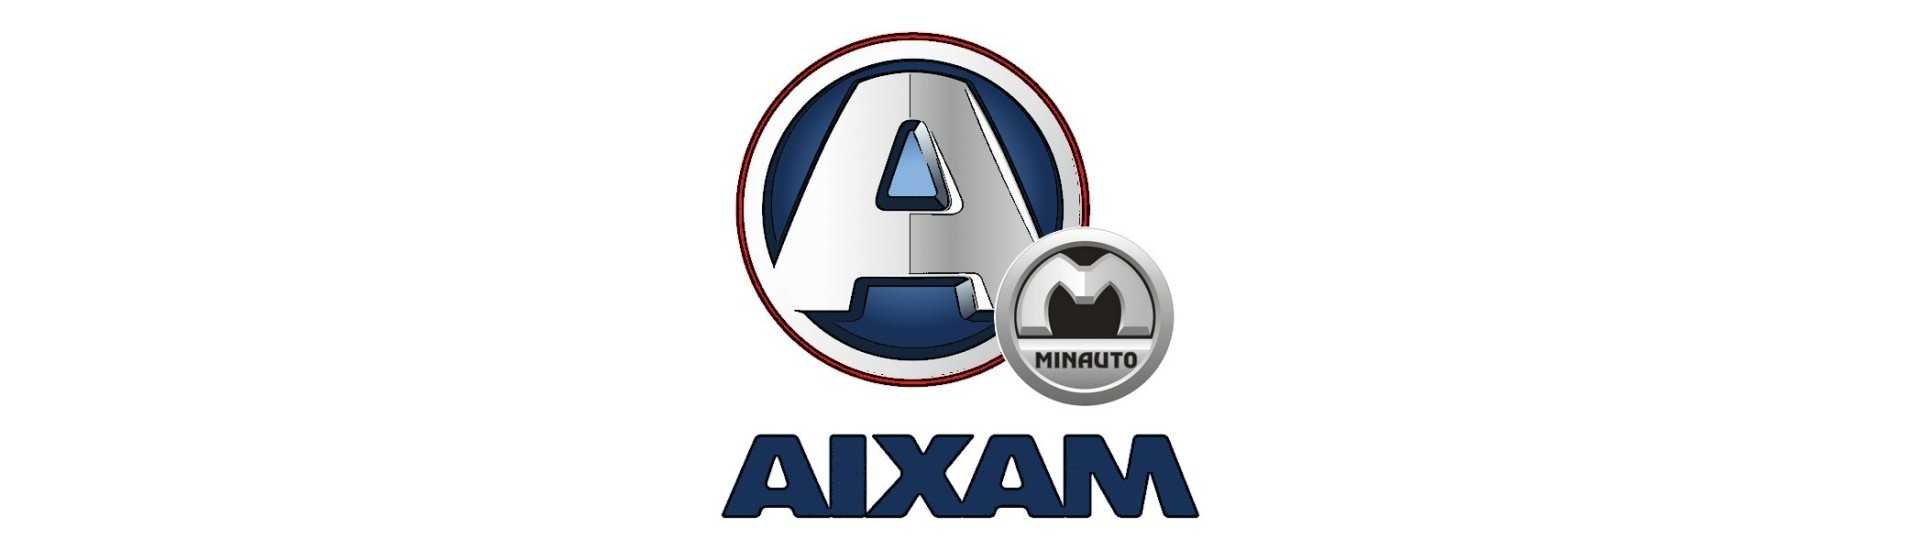 Heating block at the best price car without a permit Aixam Minauto